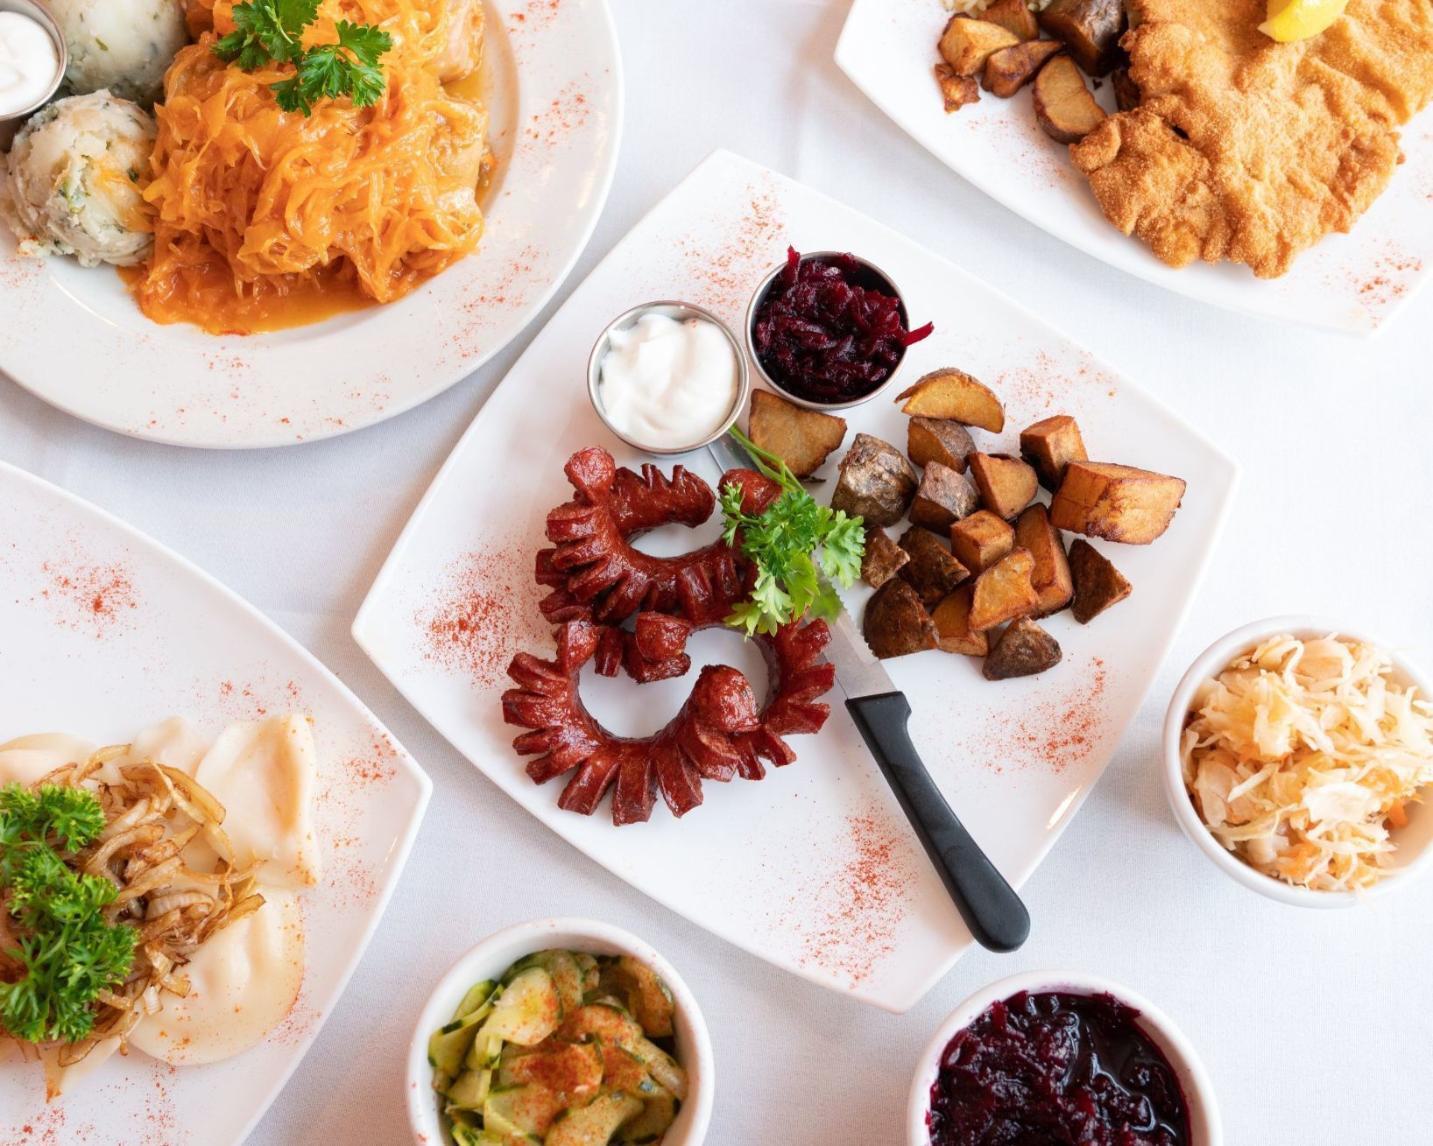 Classic German foods on a plate in a restaurant